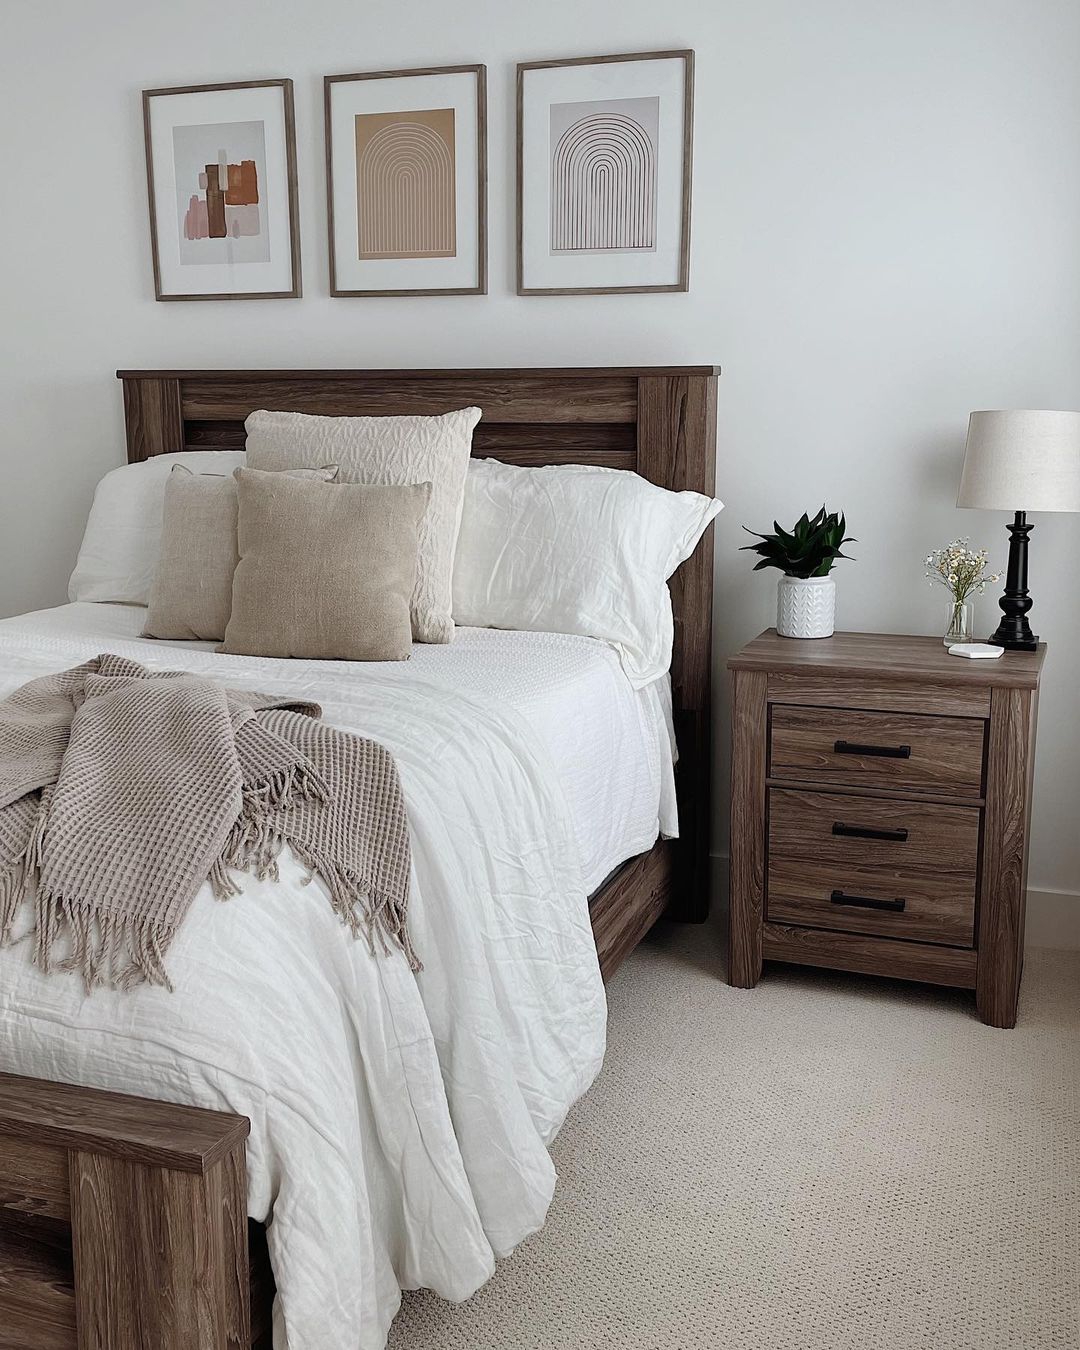 a neutral-colored minimalist bedroom interior with wooden headboar, side table, and wall art